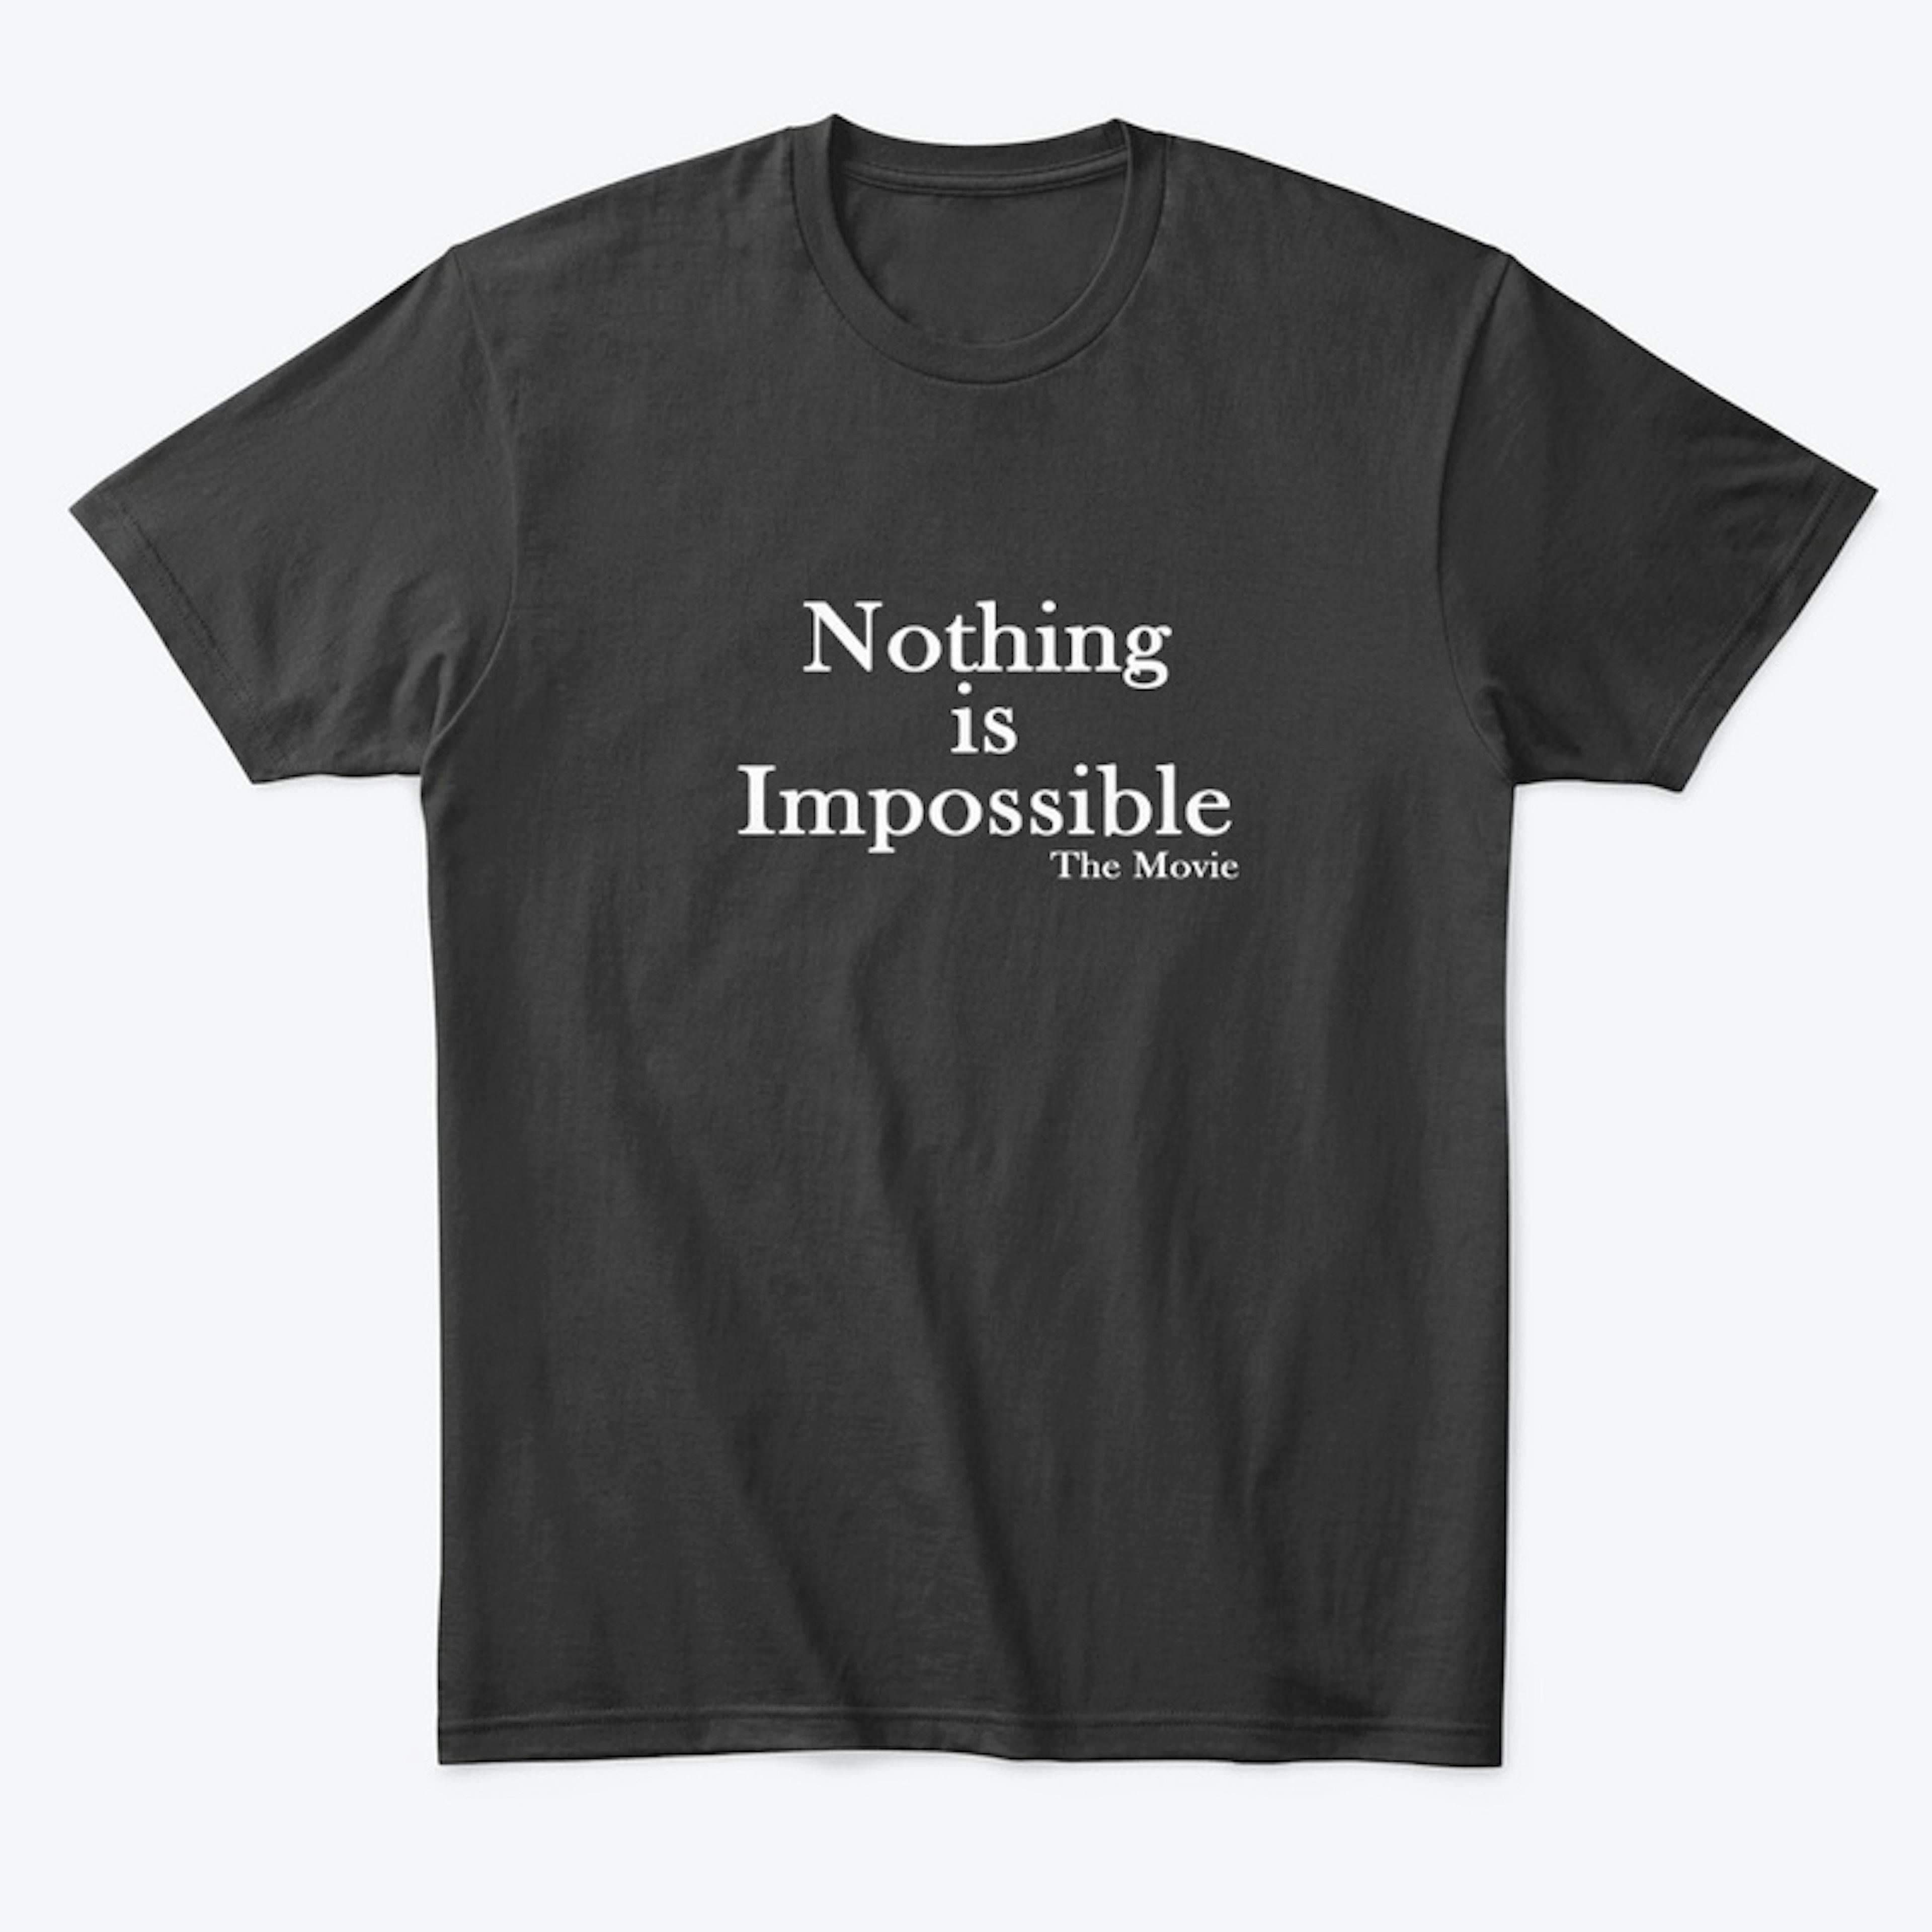 Nothing is Impossible The Movie (S1)